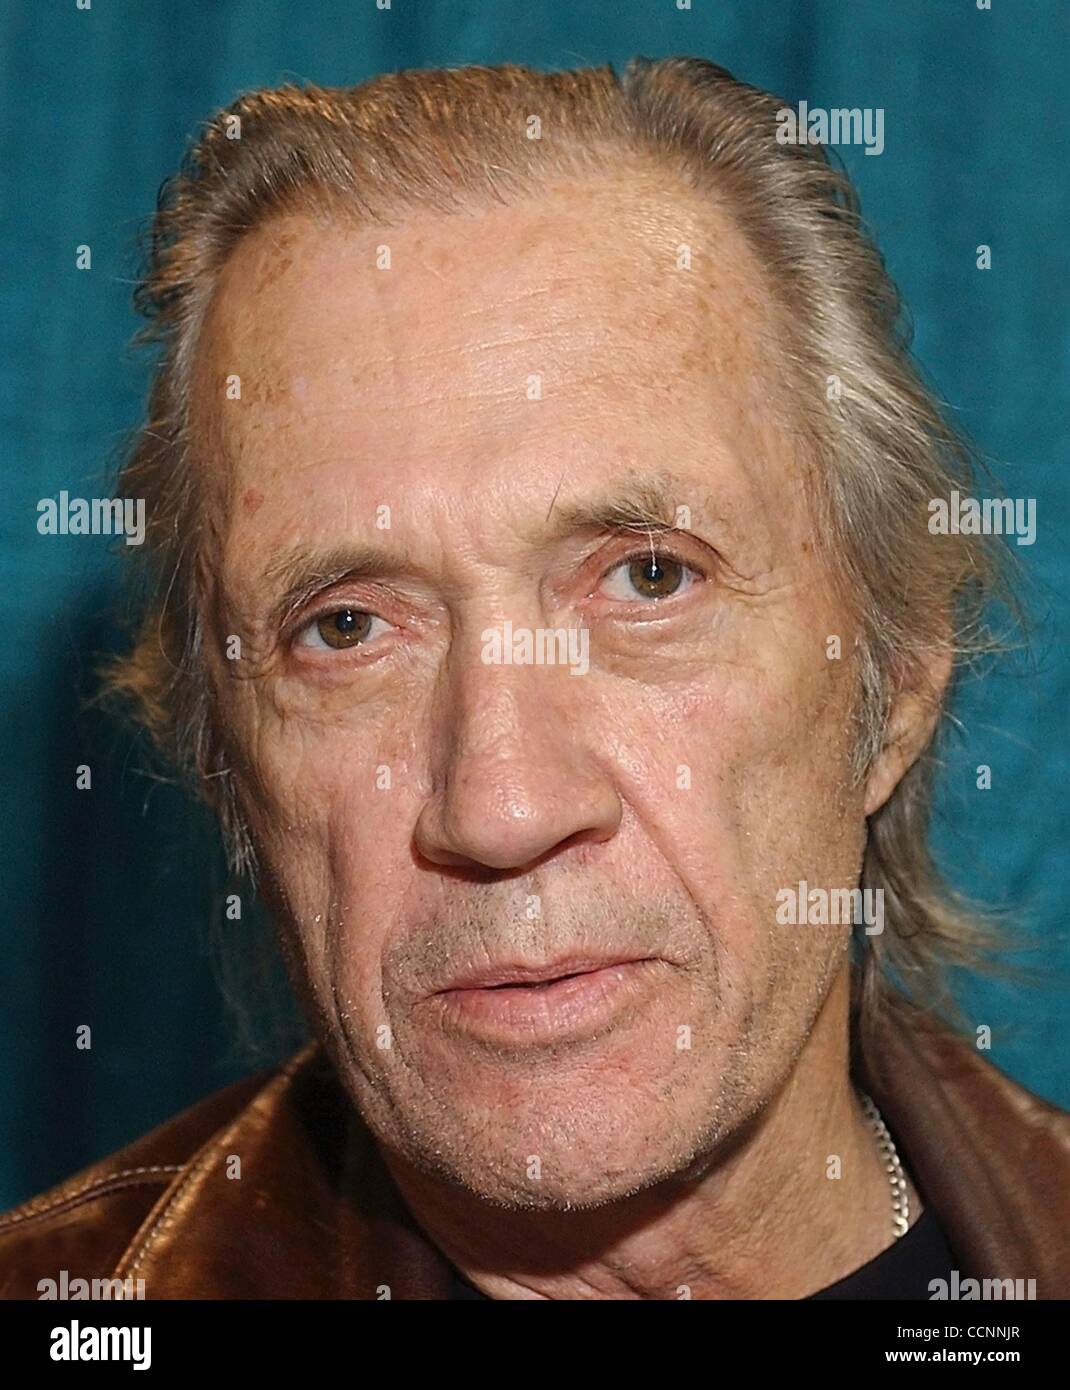 Jun 03, 2009 - Bangkok, Thailand - DAVID CARRADINE, star of 'Kung Fu,' dies at 72 Carradine was found dead in his hotel room in Bangkok, where he was working on a movie. A Thai newspaper indicates he committed suicide; the U.S. Embassy confirms his death but offers no details. Pictured - March 20, 2 Stock Photo